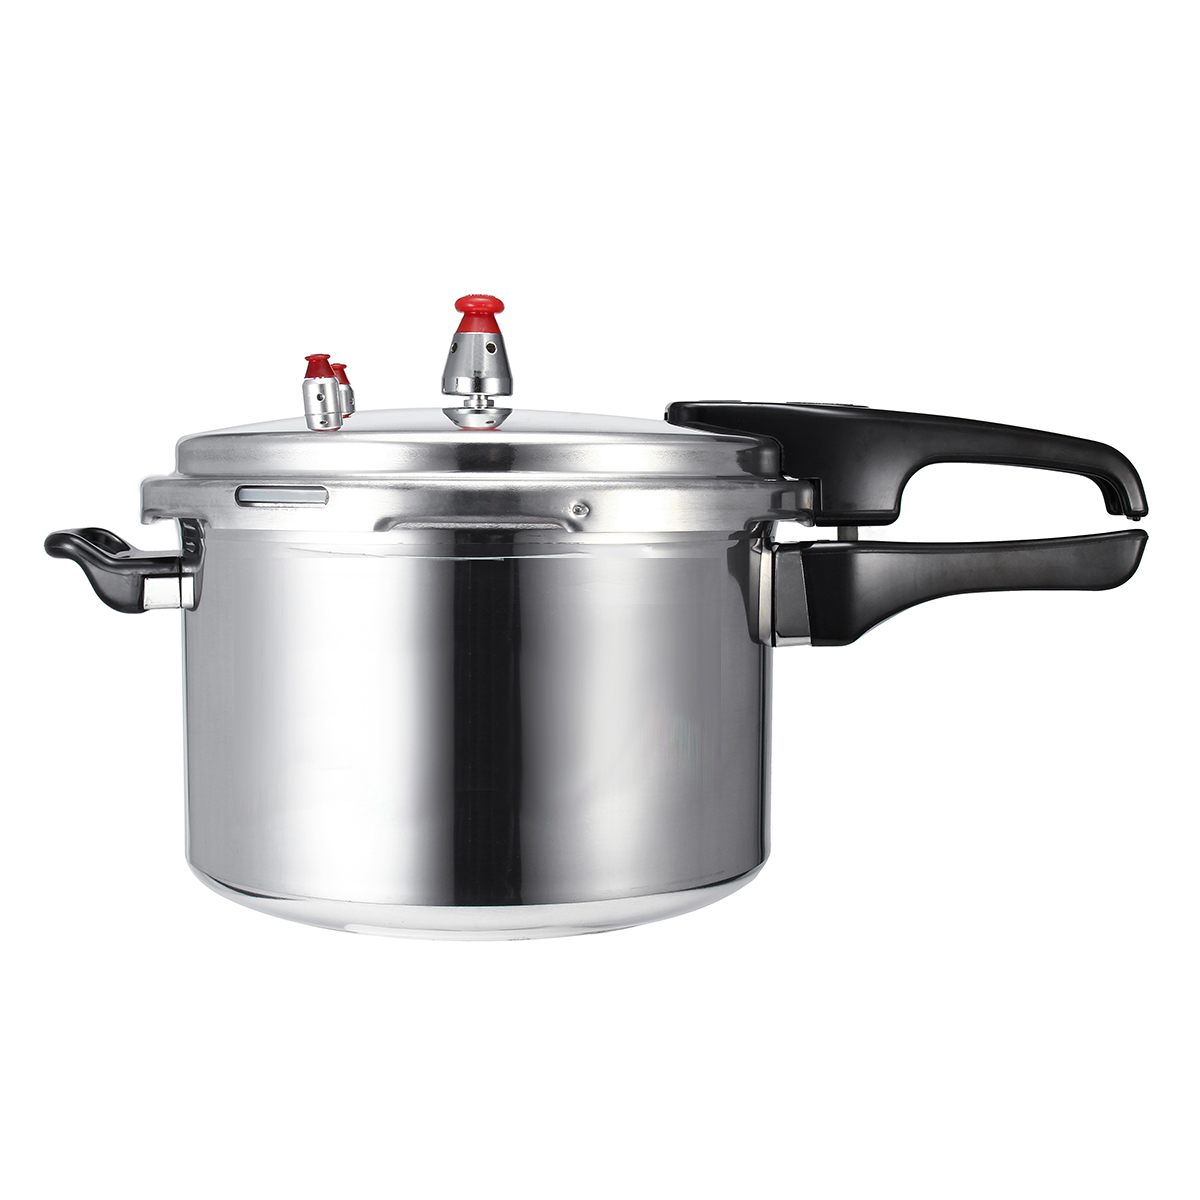 Kitchen Pressure Cooker Cookware Soup Meats Pot Gas Stove/Open Fire Pressure Cooker Outdoor Camping Cook Tool Steamer